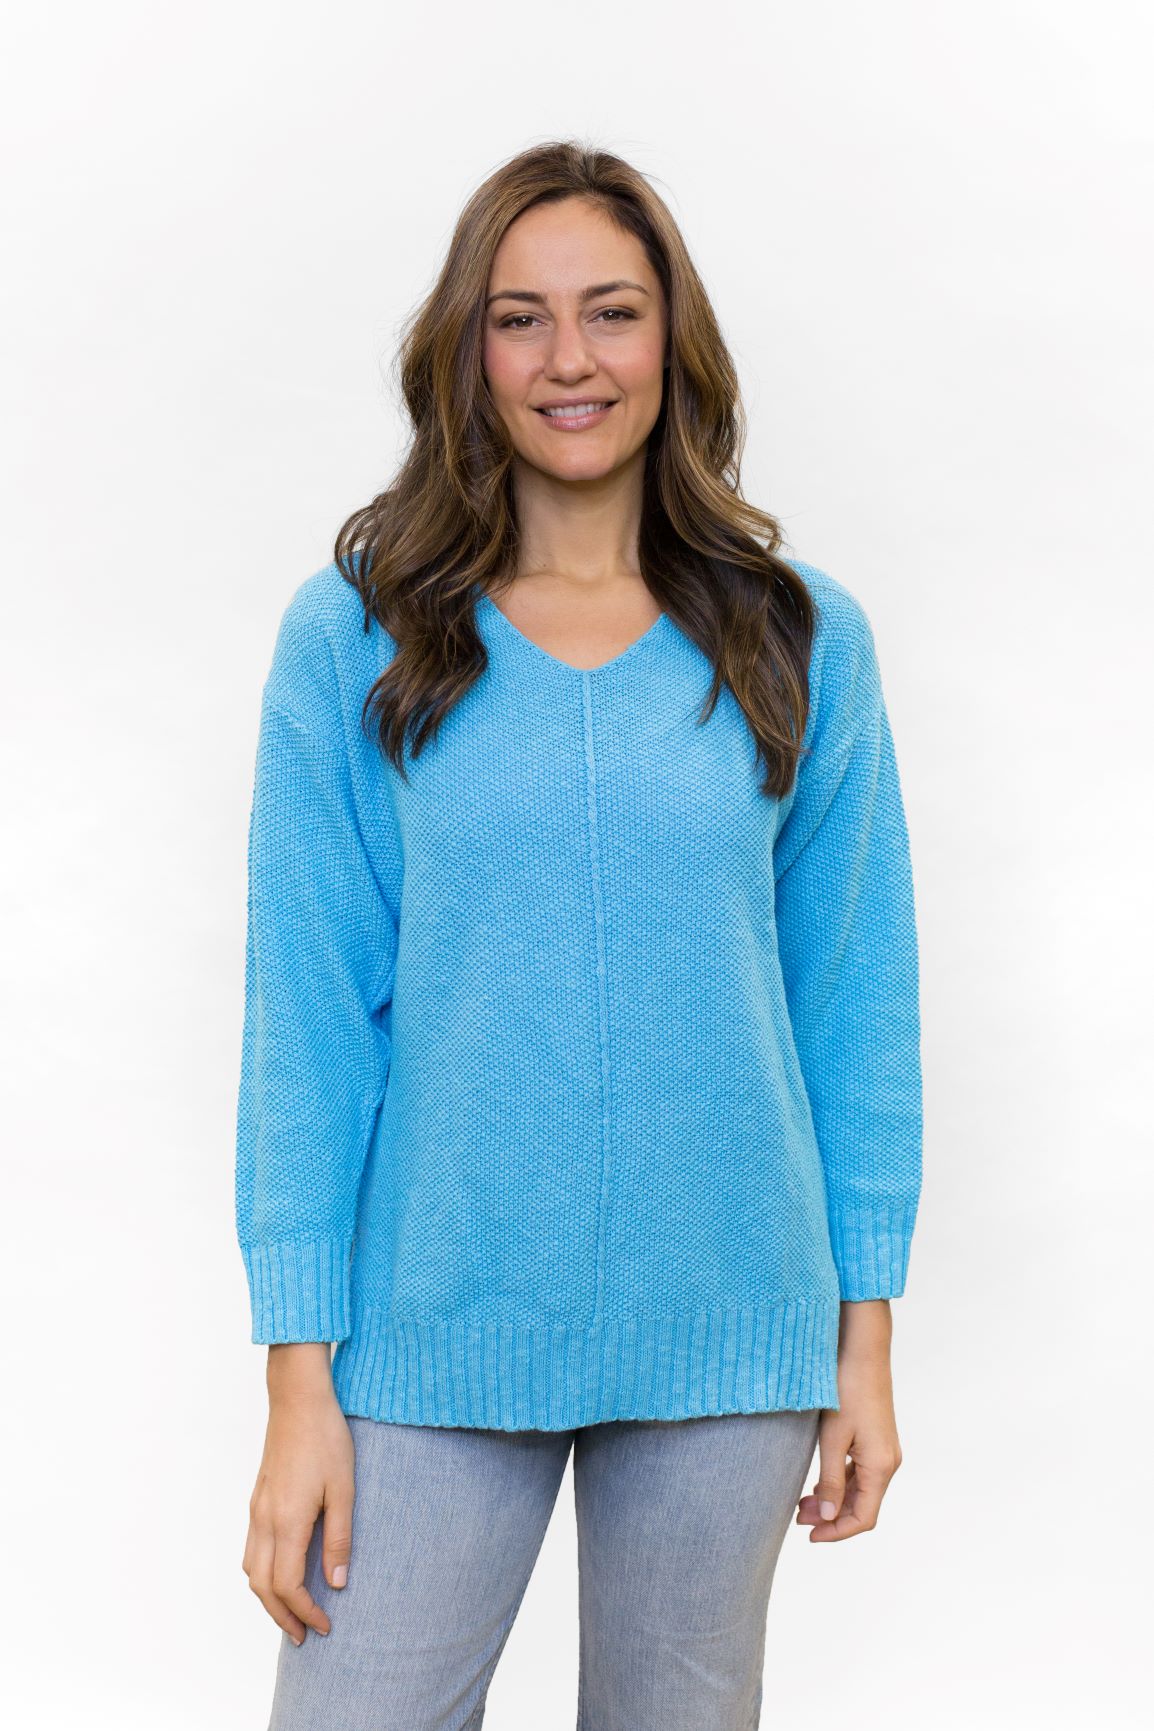 100% cotton slub seed stitch sweater by Avalin. In color Turquoise with long sleeves, v-neck, center seam, ribbed cuffs and ribbed straight hem with side slits. Falls just below mid hip.  Made in USA.